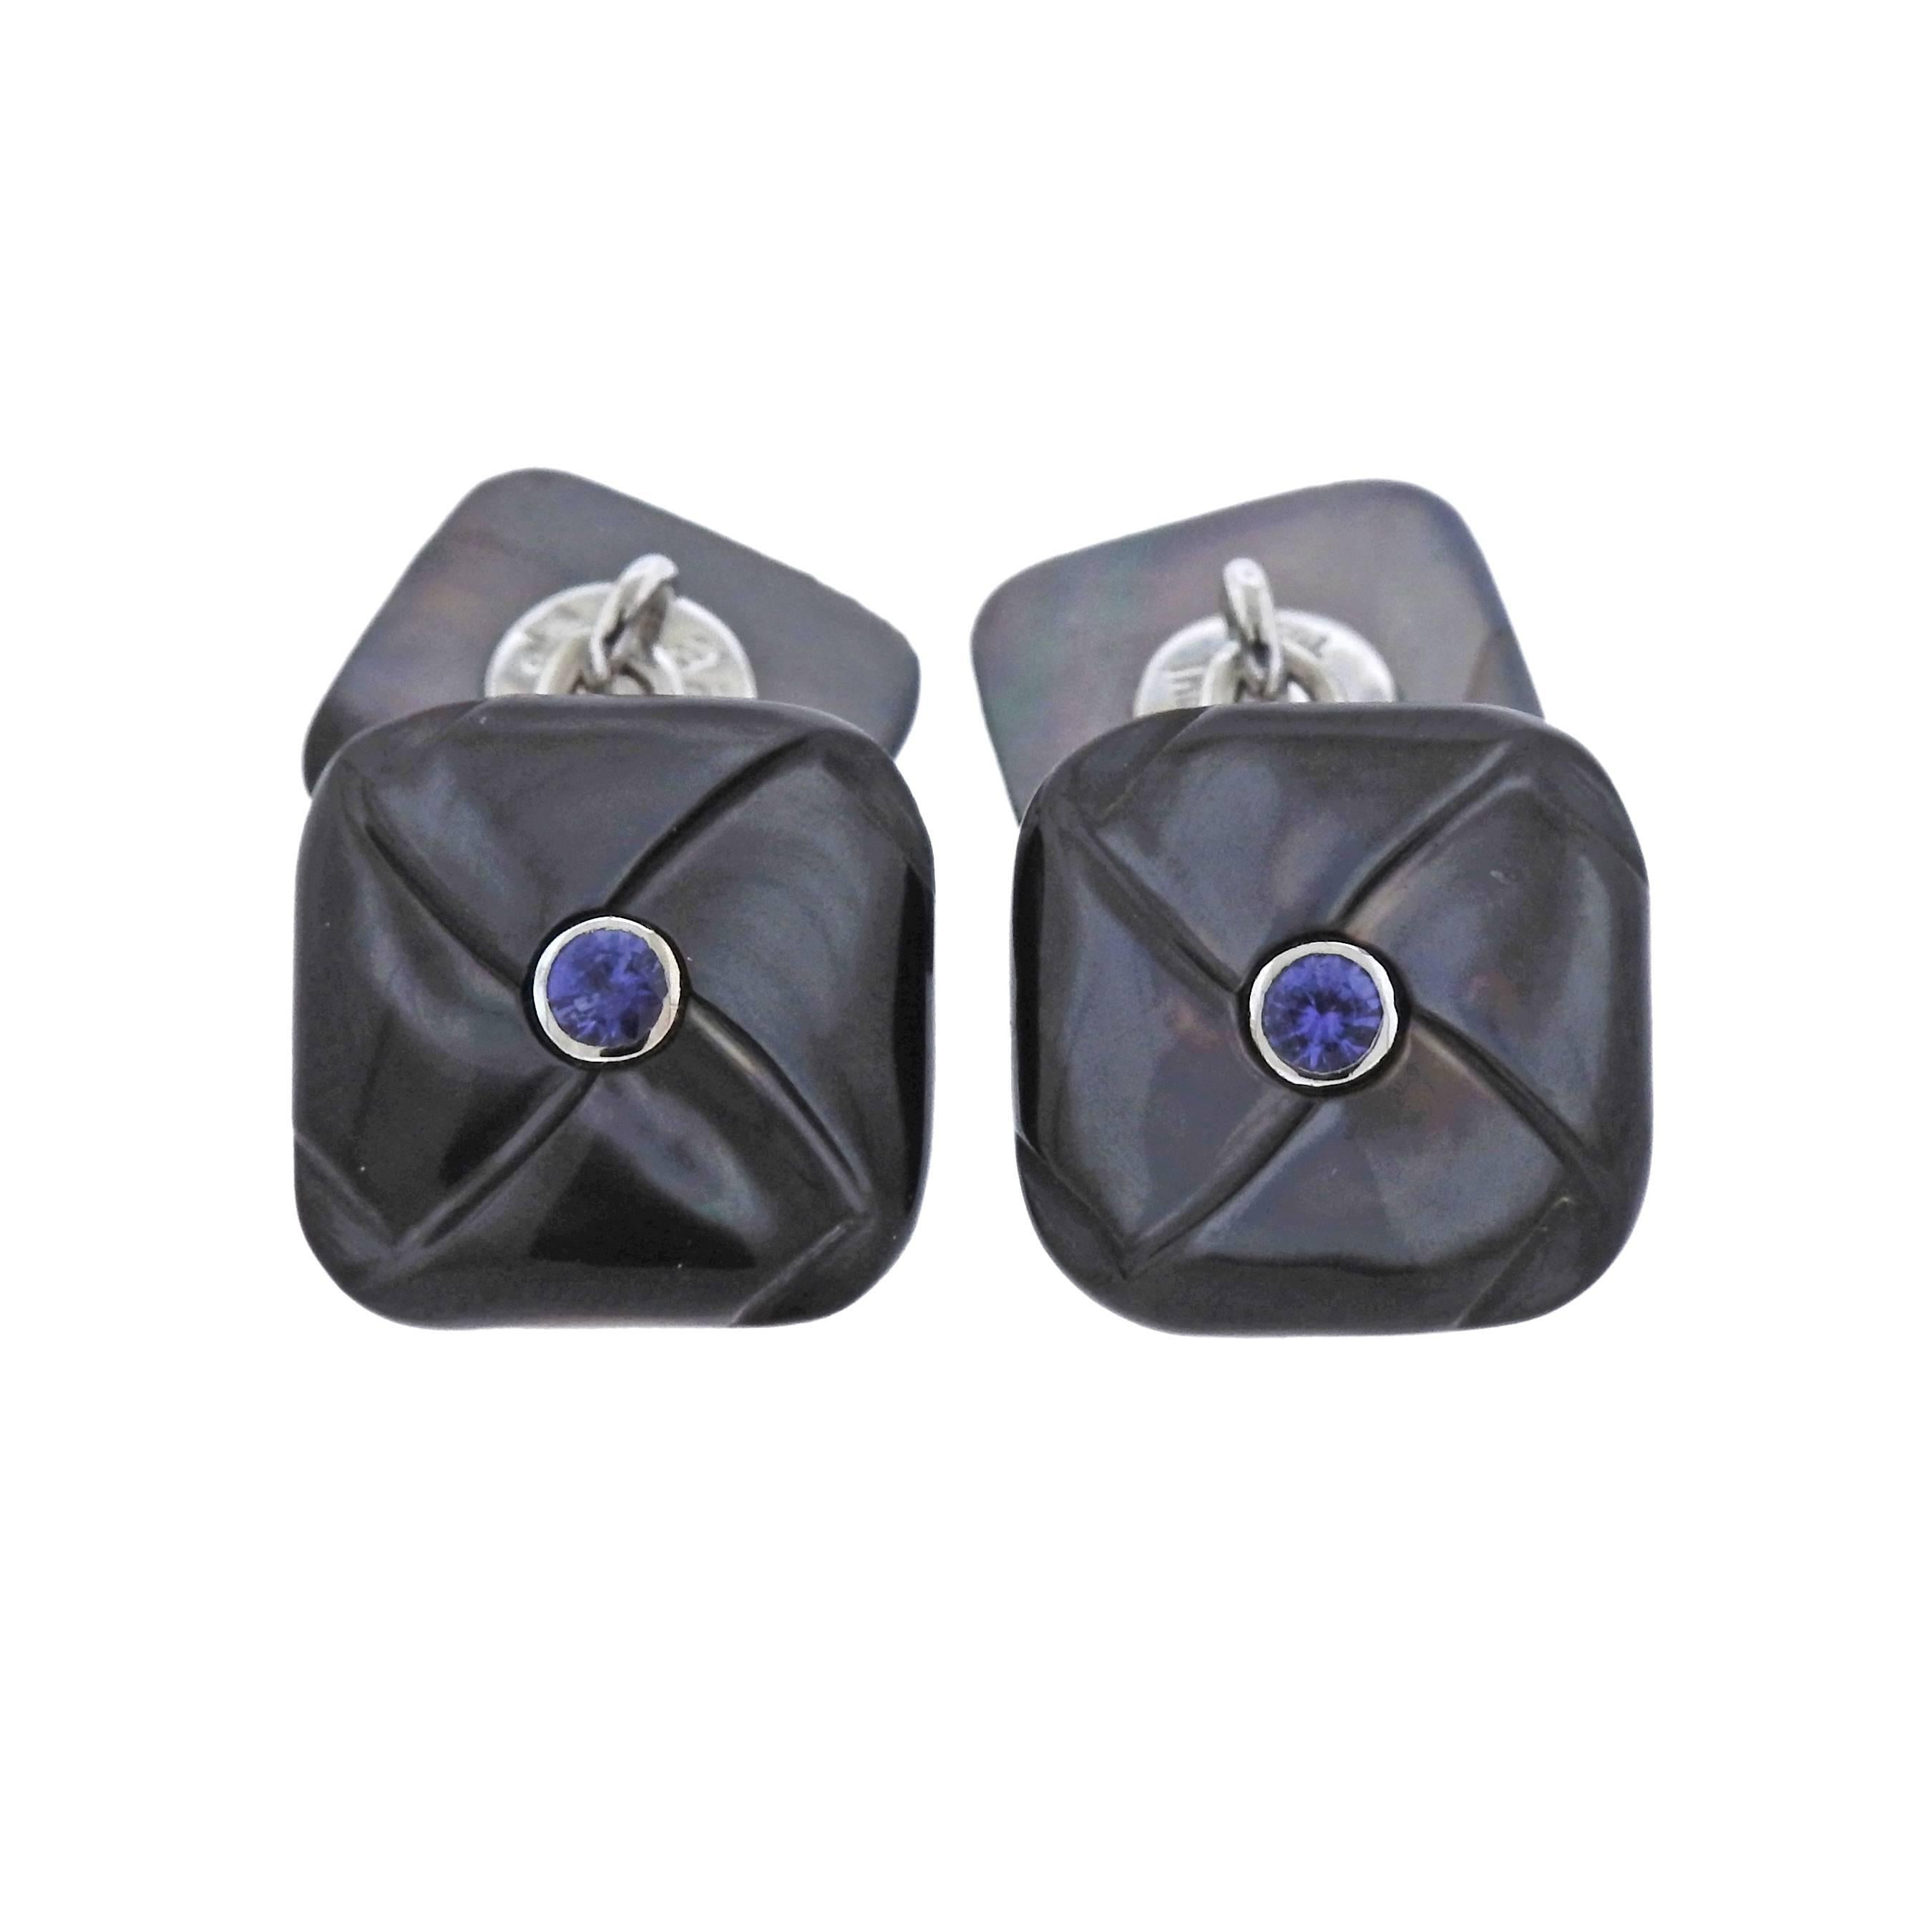 Pair of 18k white gold cufflinks by Trianon, featuring mother of pearl top, with iolite in the center. Larger top - 14mm x 14mm, smaller - 12mm x 12mm. Weight of the set - 6.5 grams. Marked: Maker's mark, Trianon, 750.
